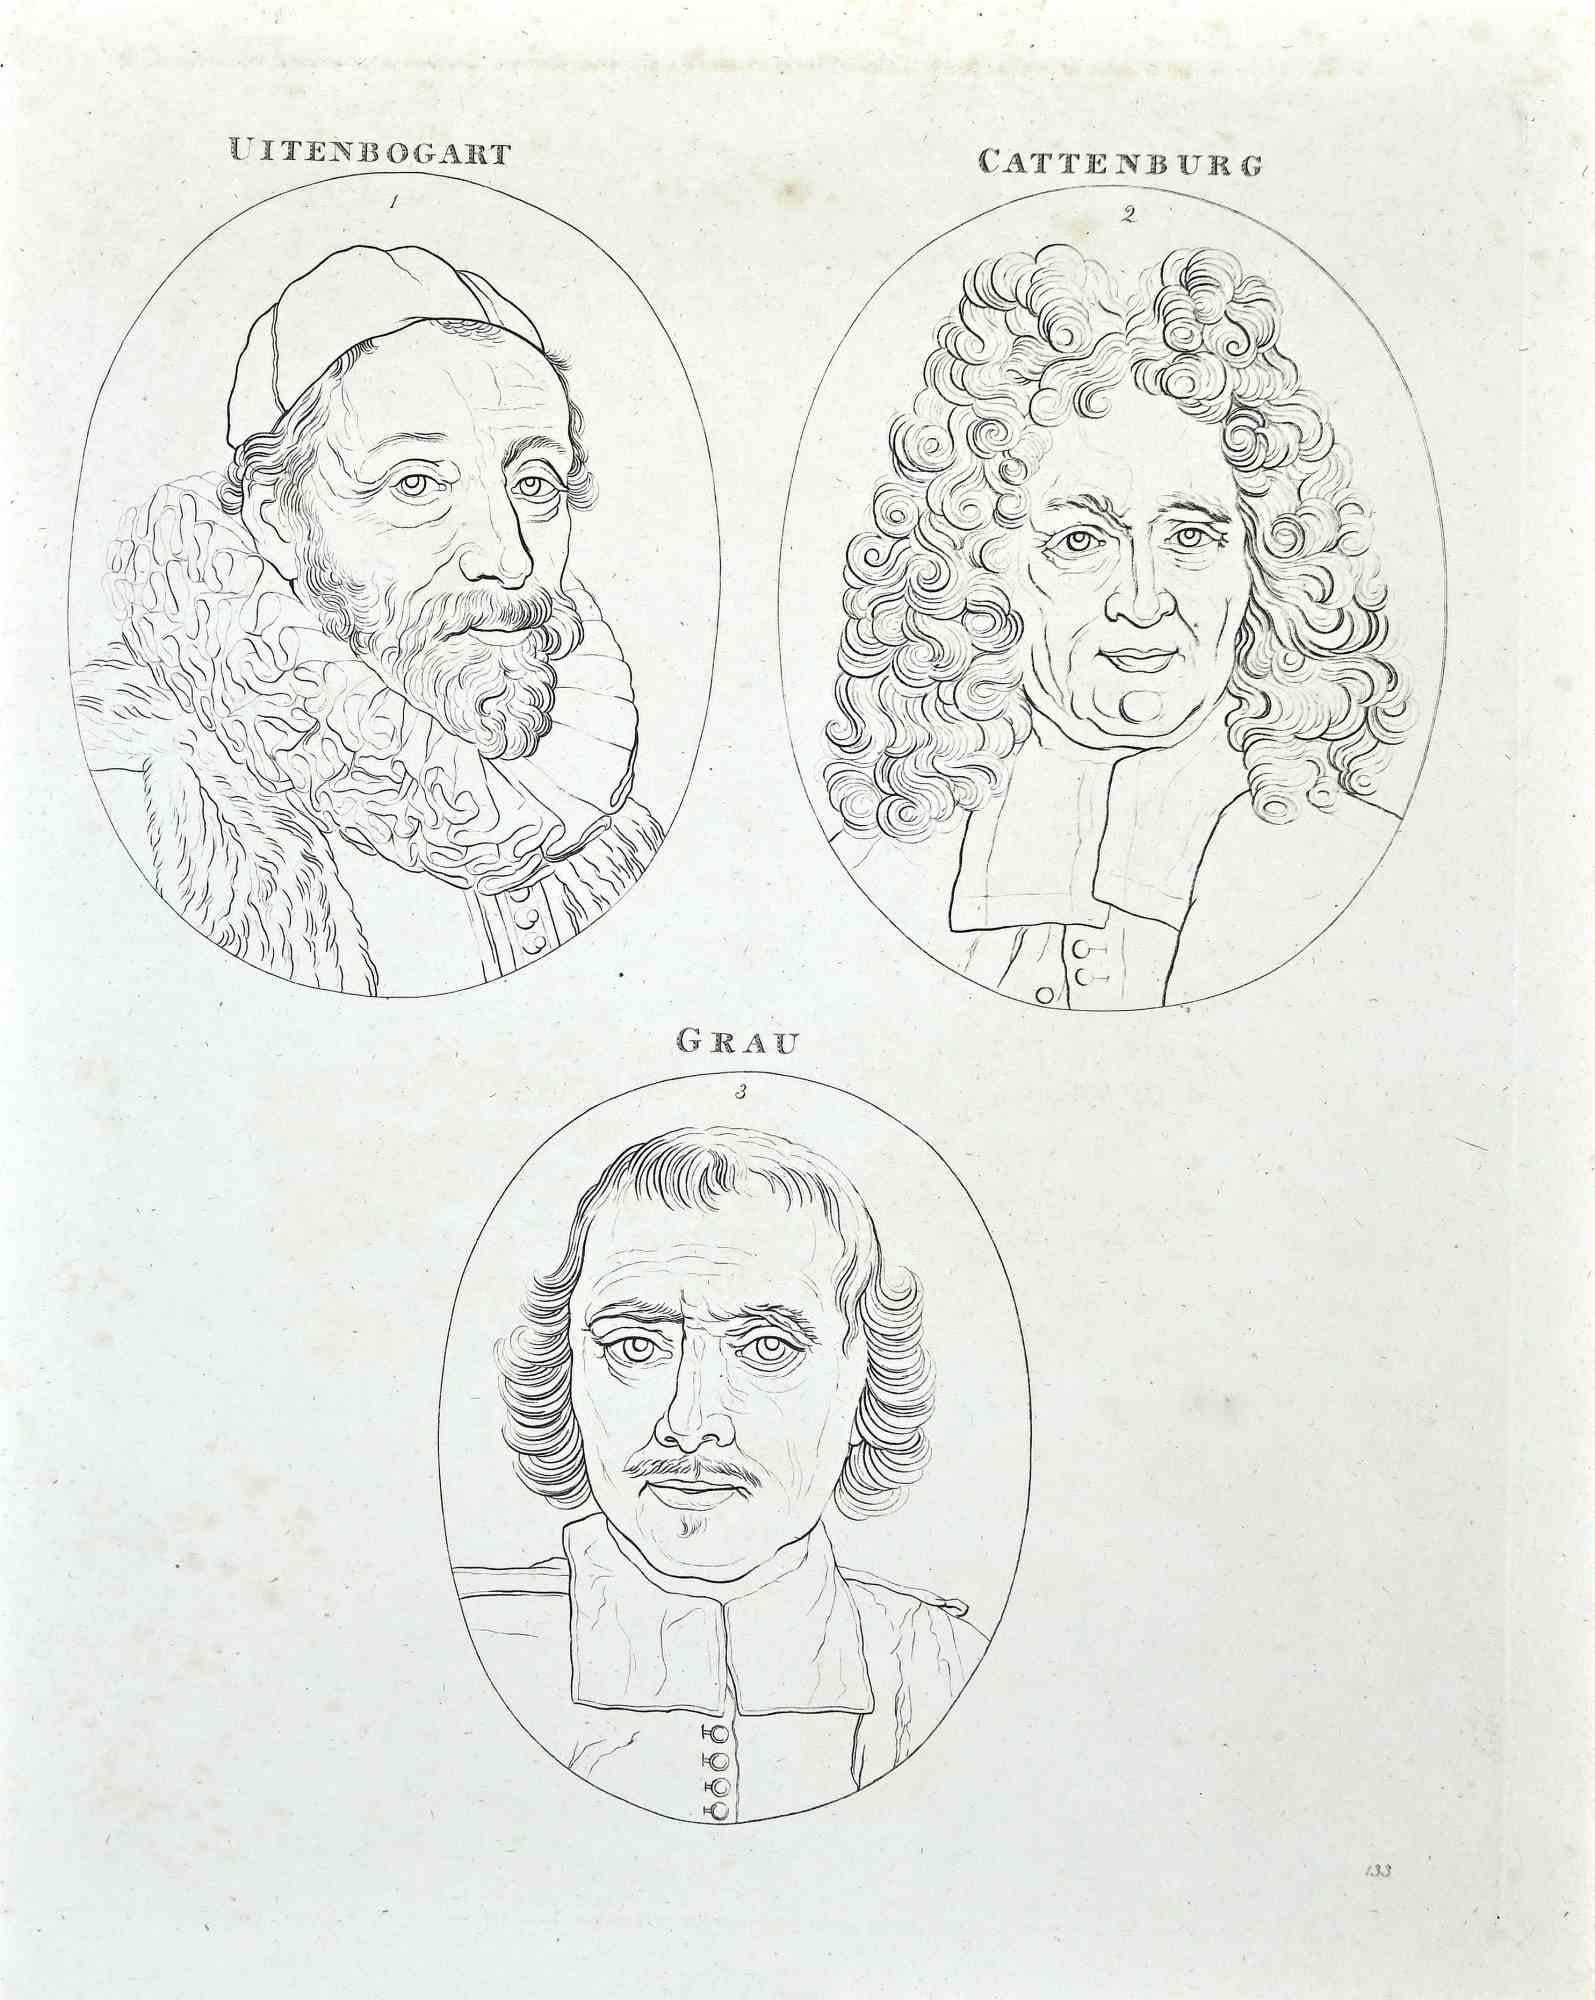 The Portraits of Masters is an original etching artwork realized by Thomas Holloway for Johann Caspar Lavater's "Essays on Physiognomy, Designed to Promote the Knowledge and the Love of Mankind", London, Bensley, 1810. 

Good conditions.

Johann